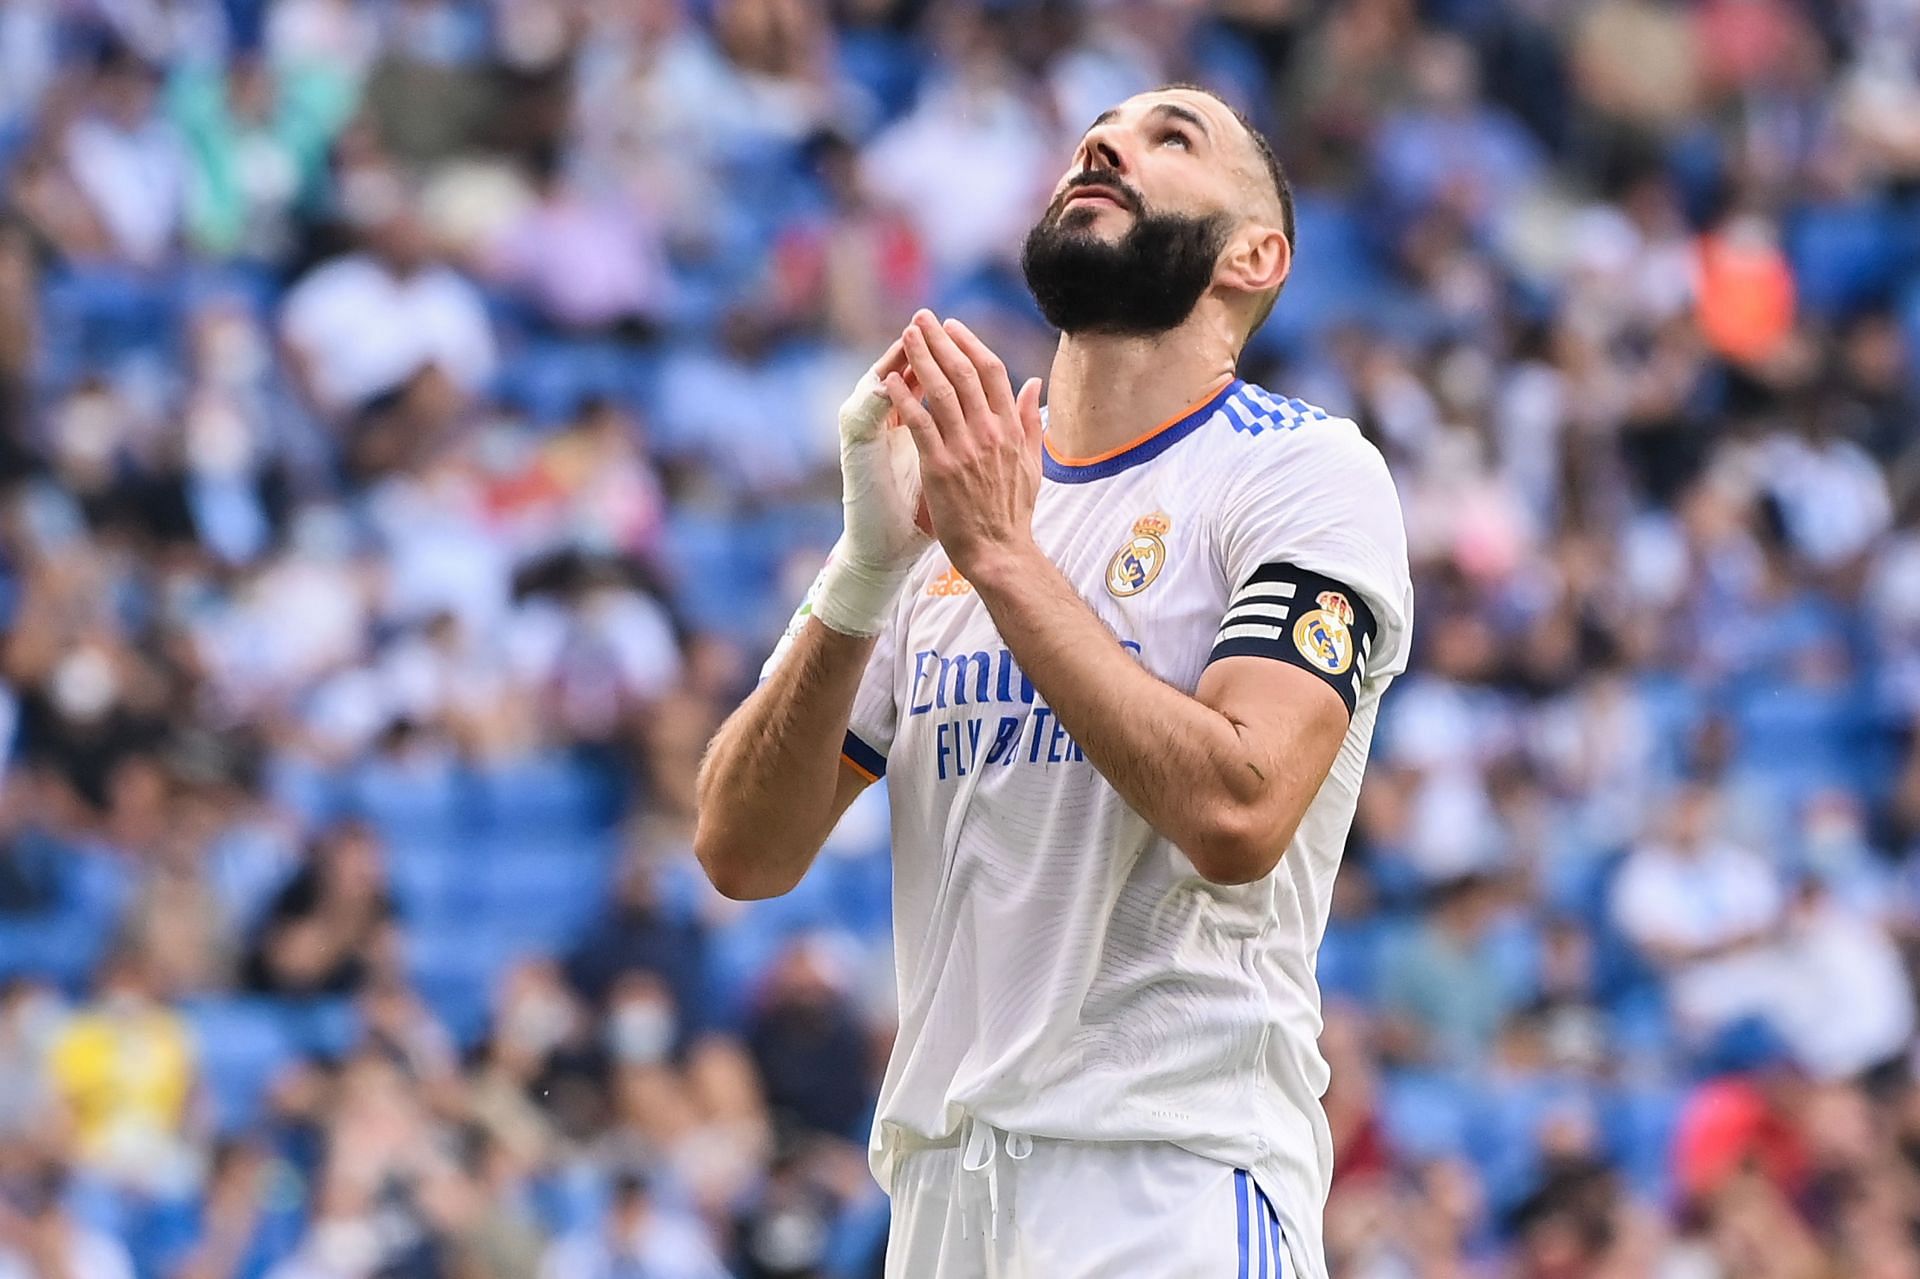 Benzema has been directly involved in 16 goals in just 8 games